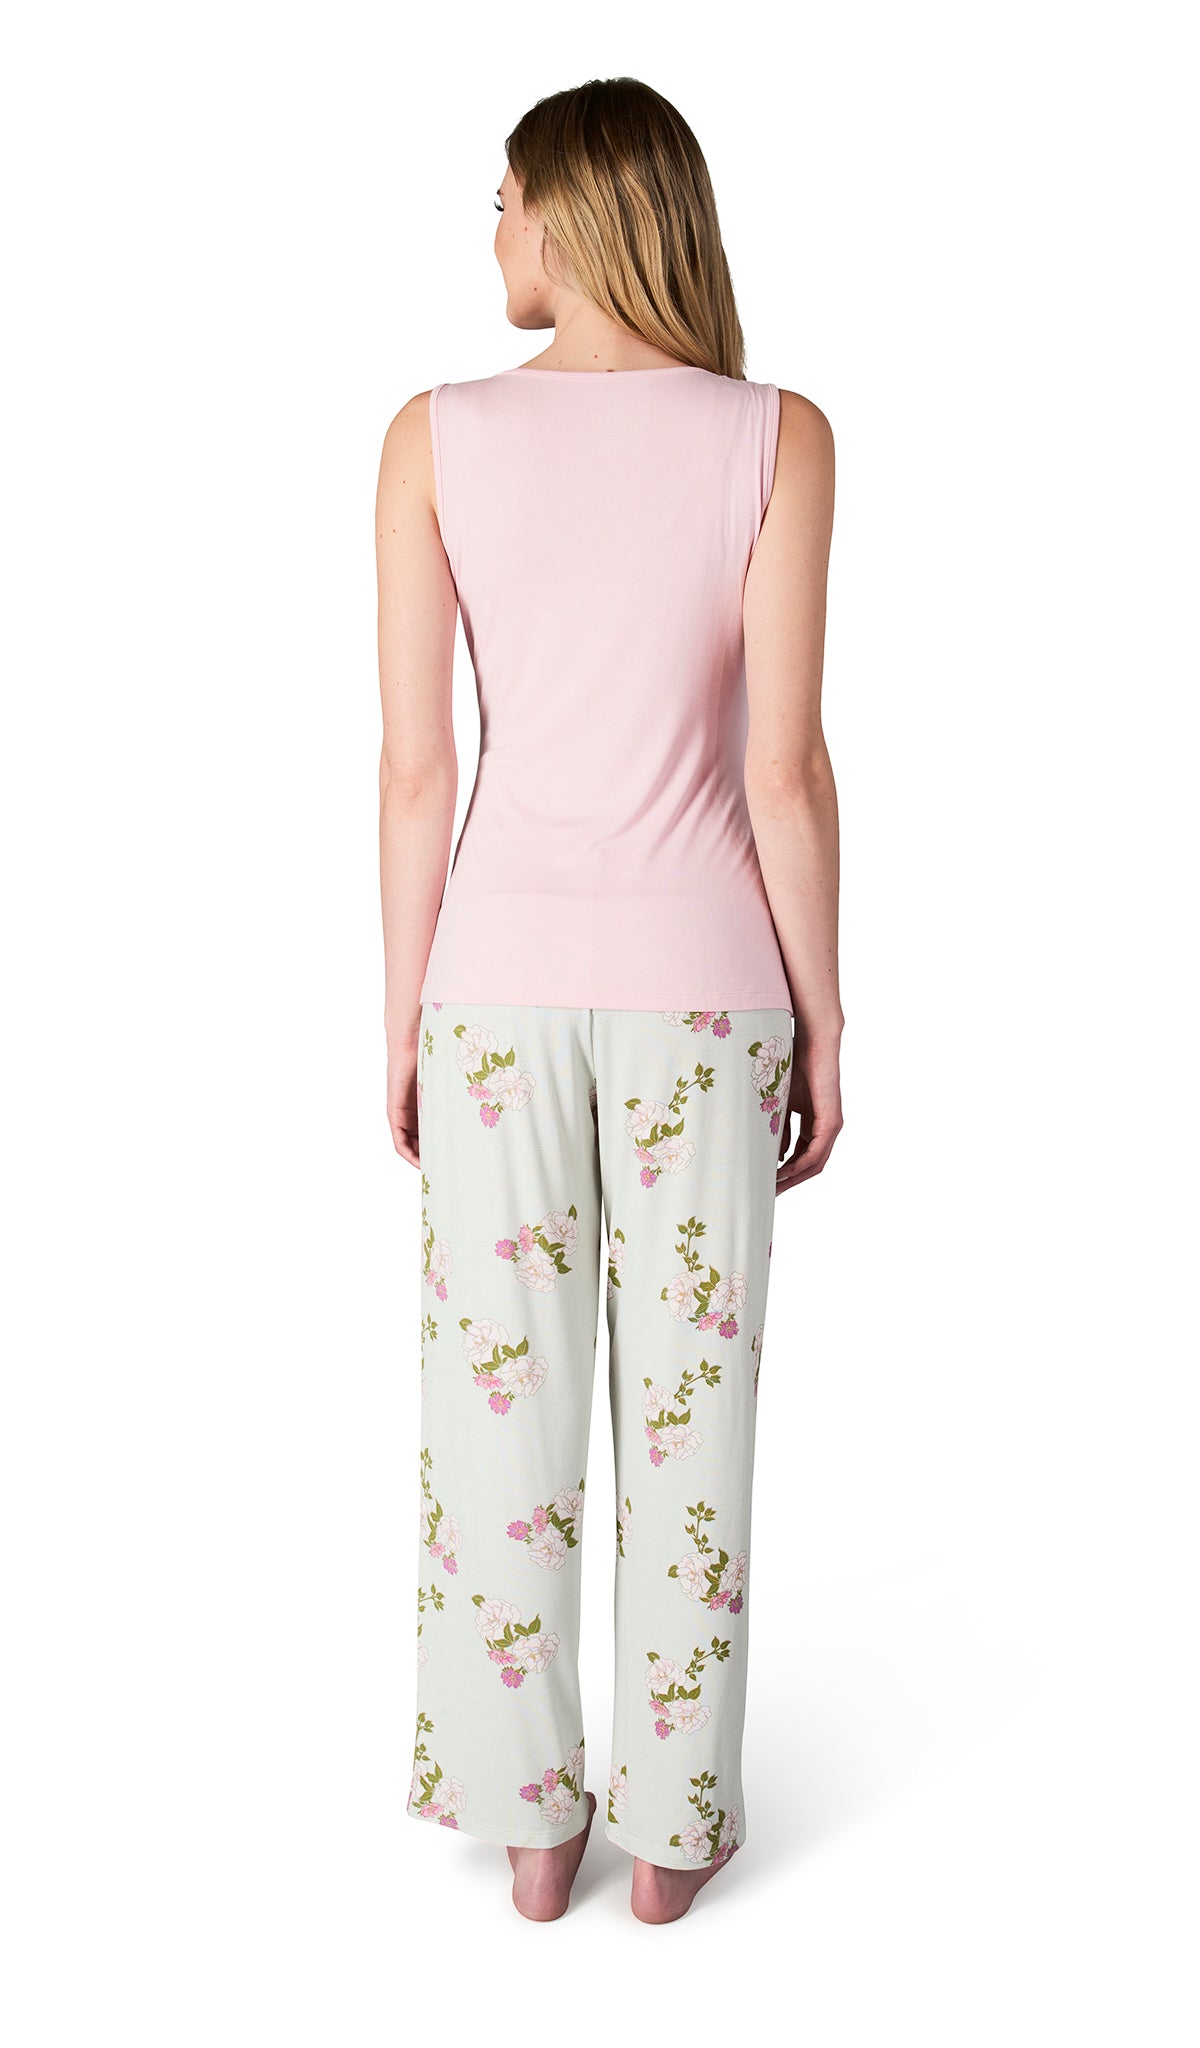 Peony Analise 5-Piece Set, back shot of woman wearing tank top and pant.